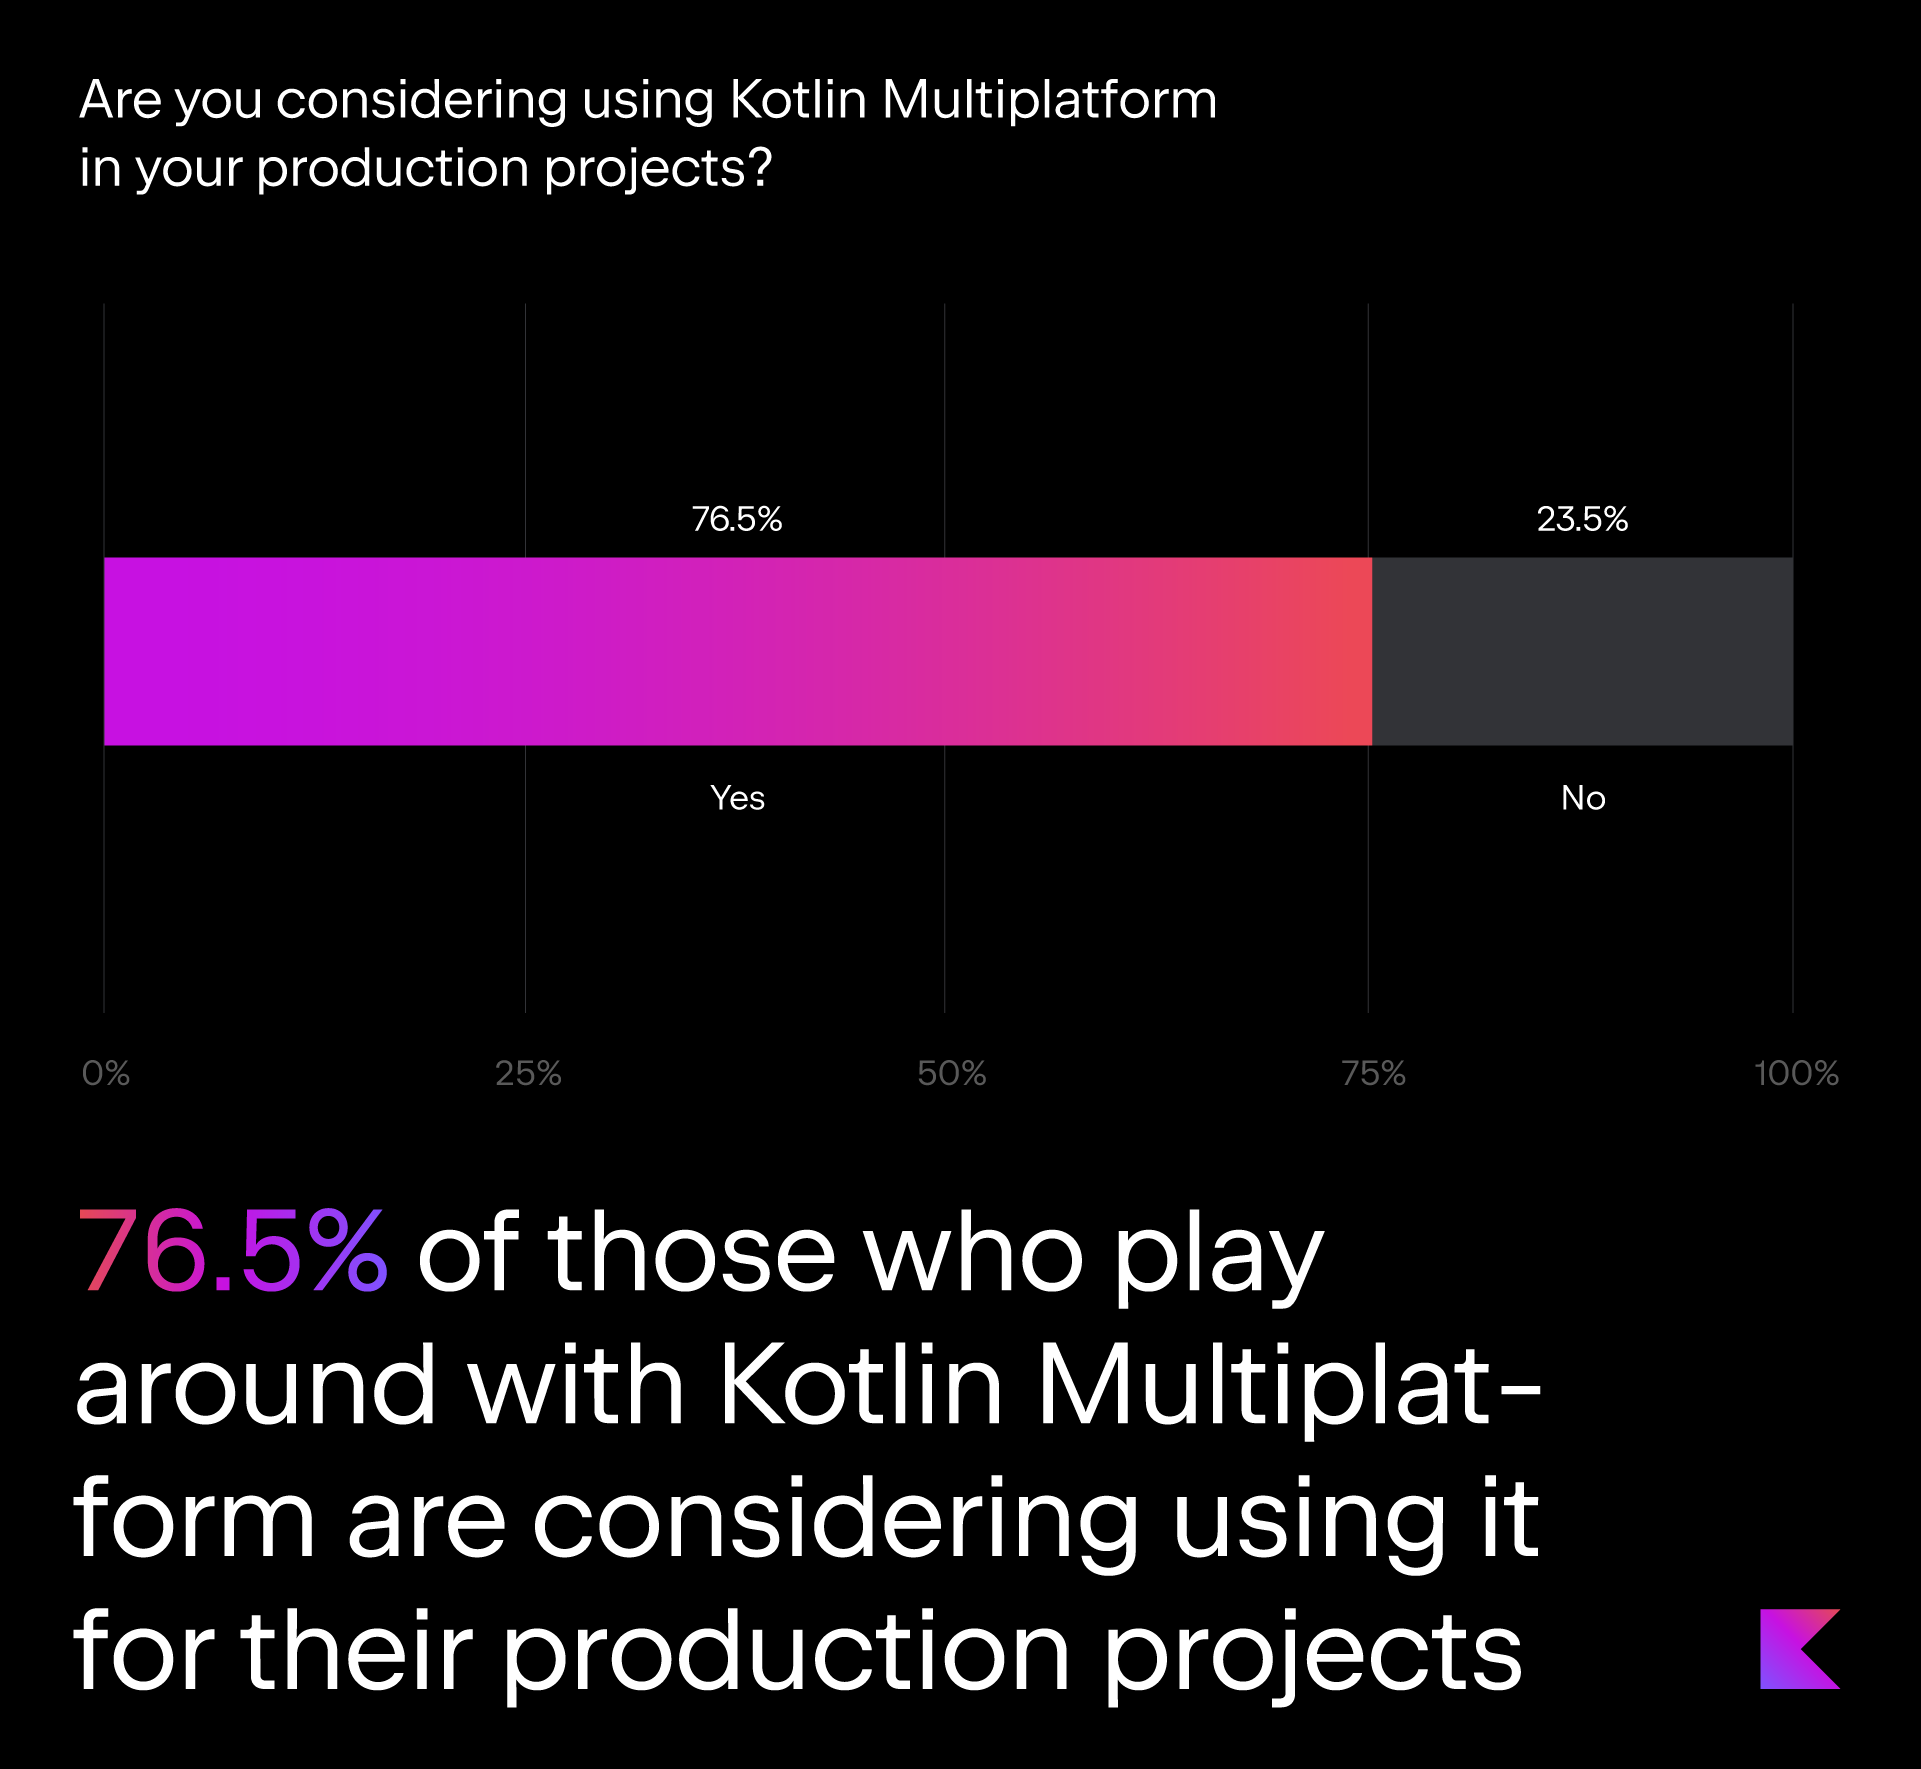 76.5% of those who play around with Kotlin Multiplatform are considering using it for their production projects